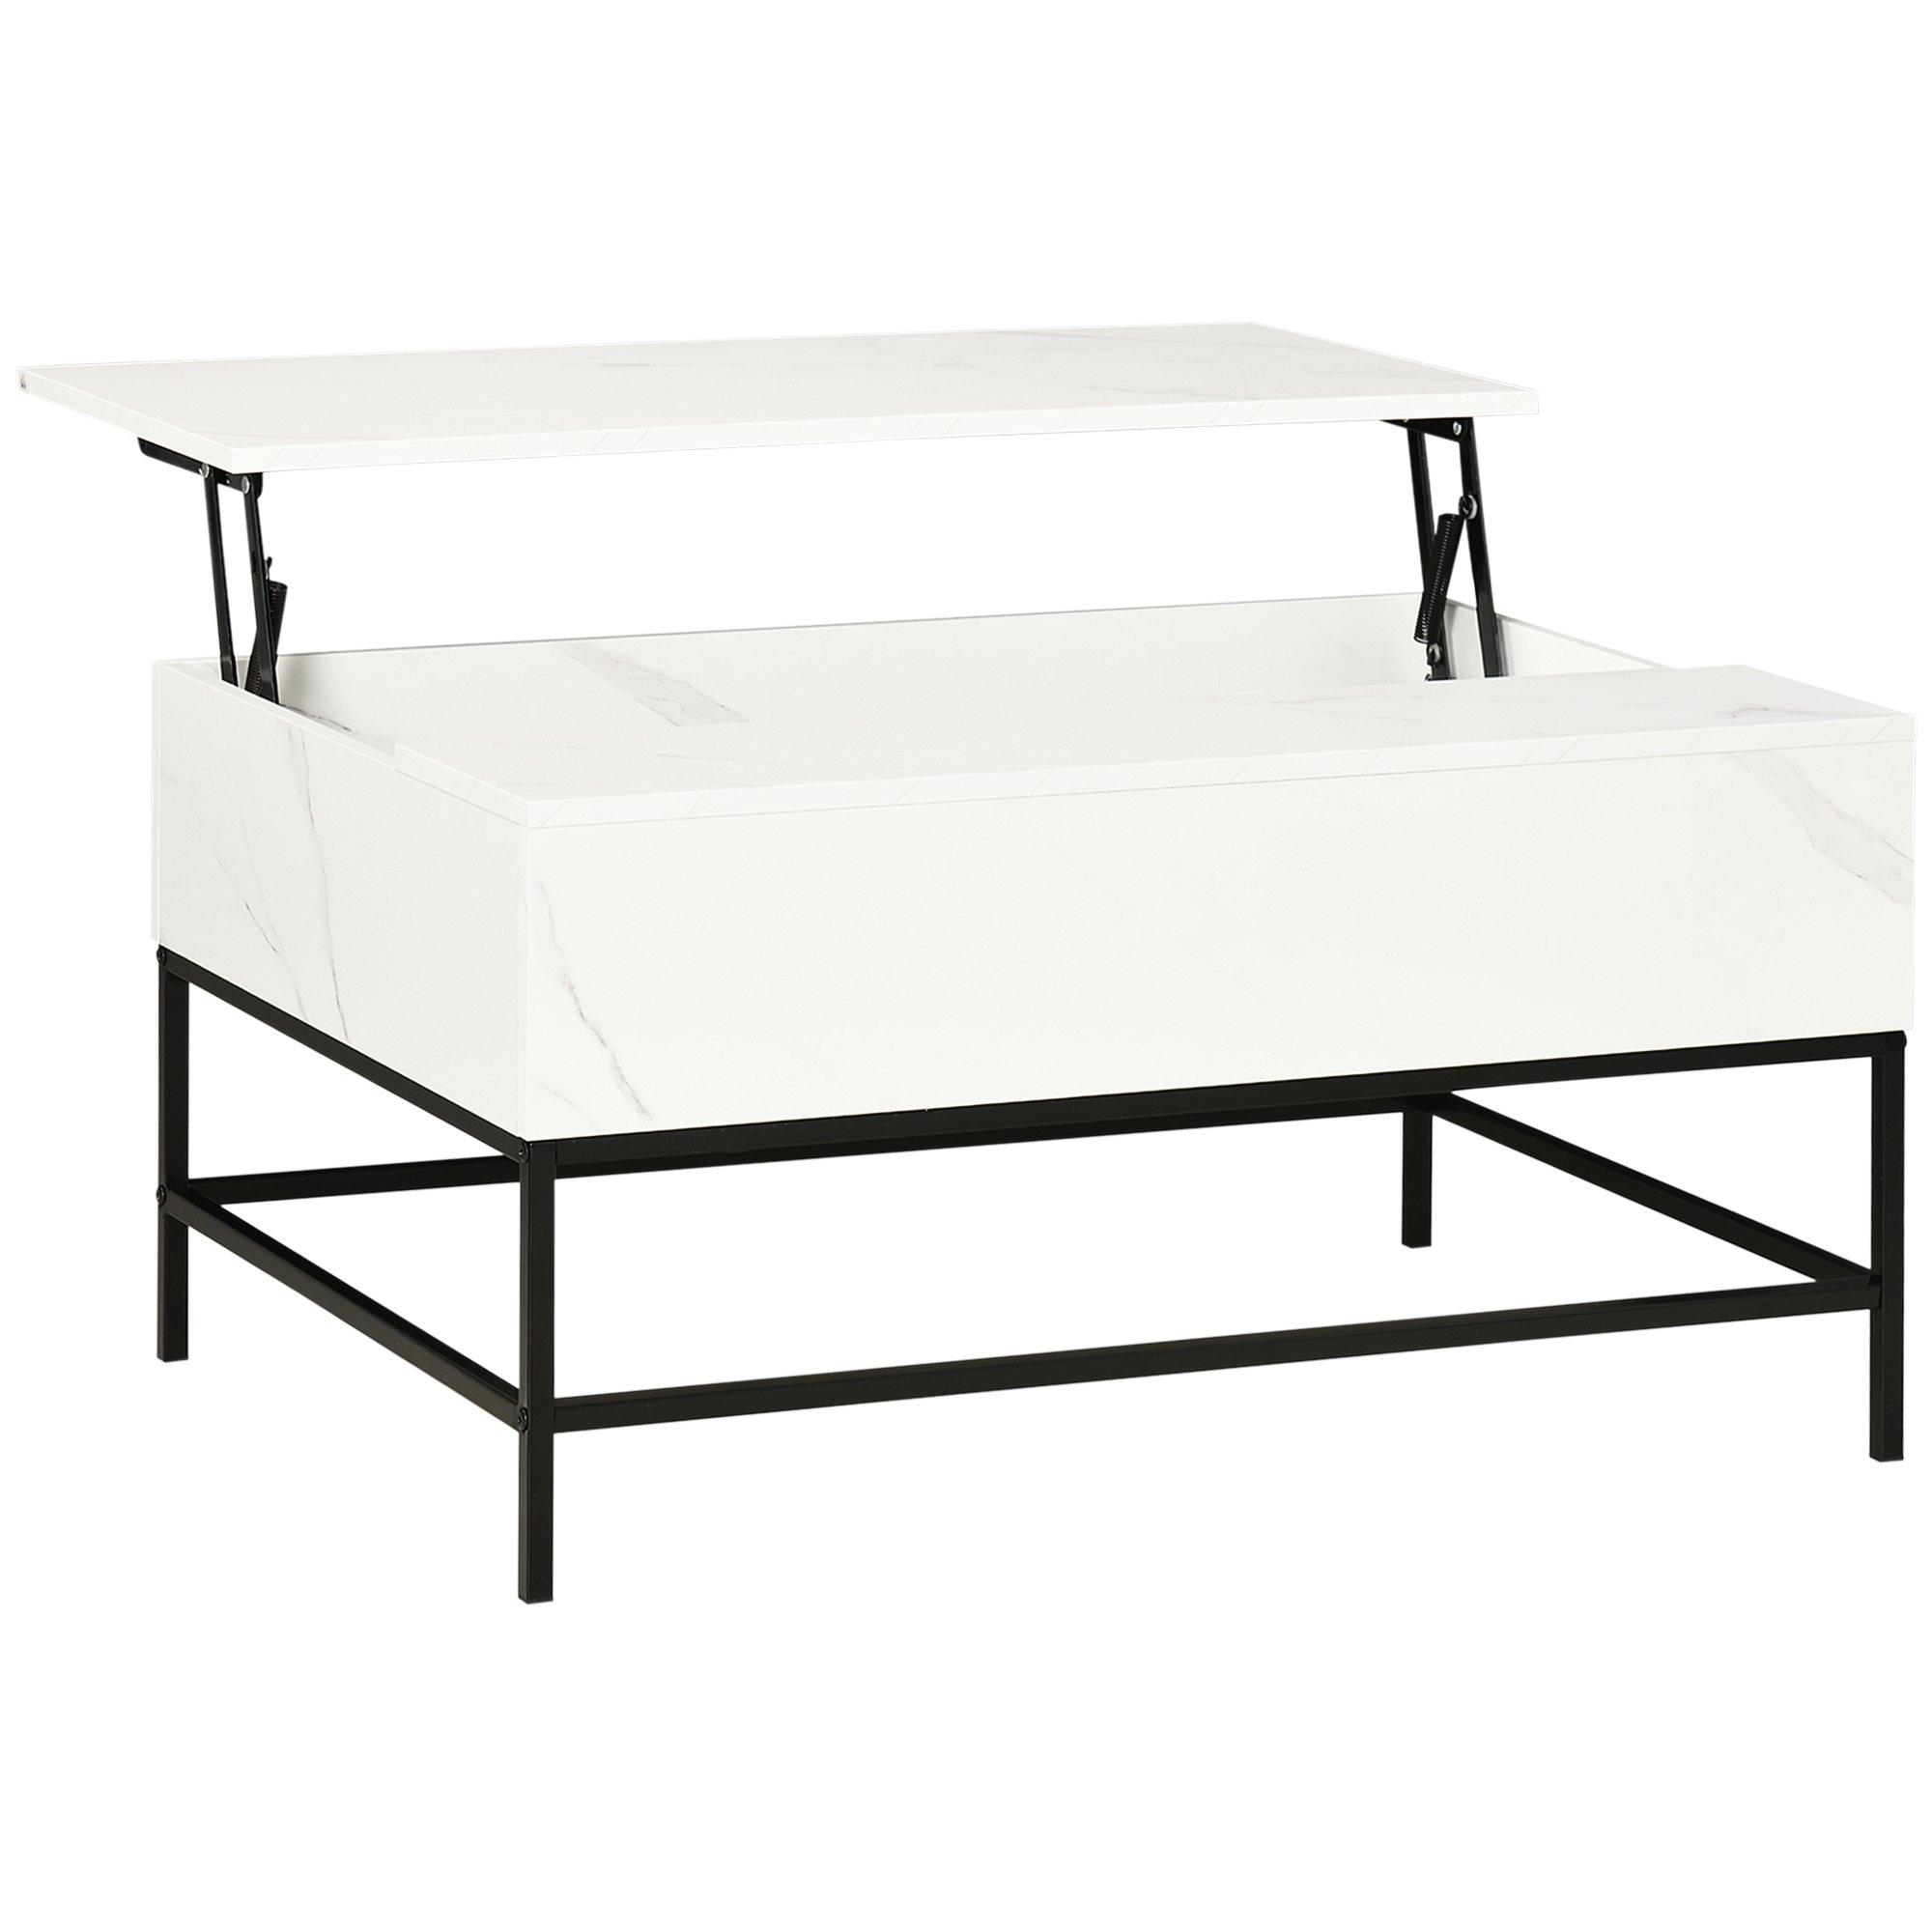 Modern Lift Top Coffee Table for Living Room with Hidden Storage